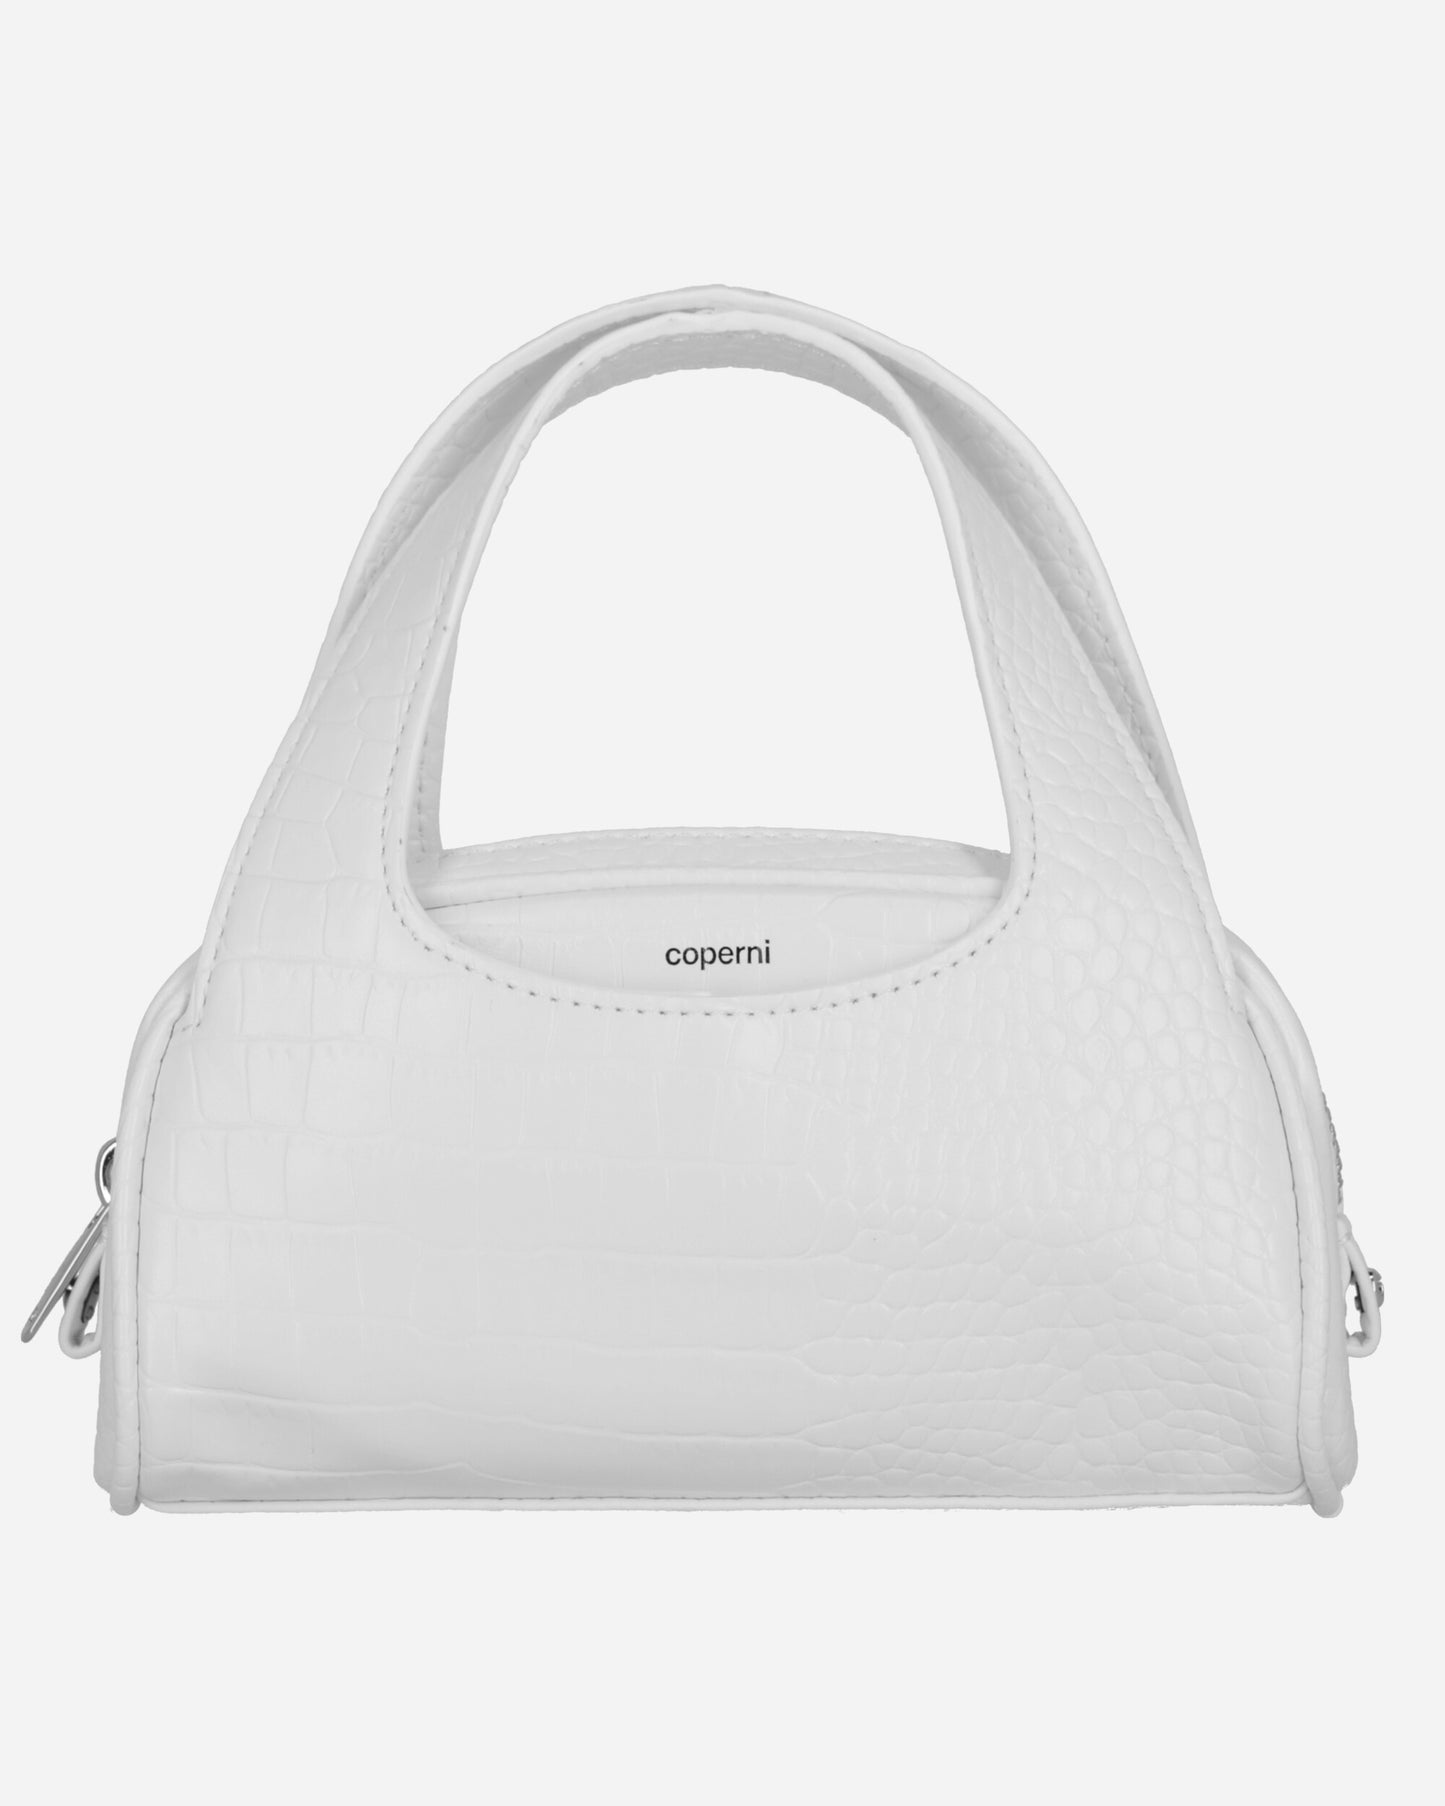 Coperni Wmns Small Bag White Bags and Backpacks Shoulder Bags 09136502 PUWHTE